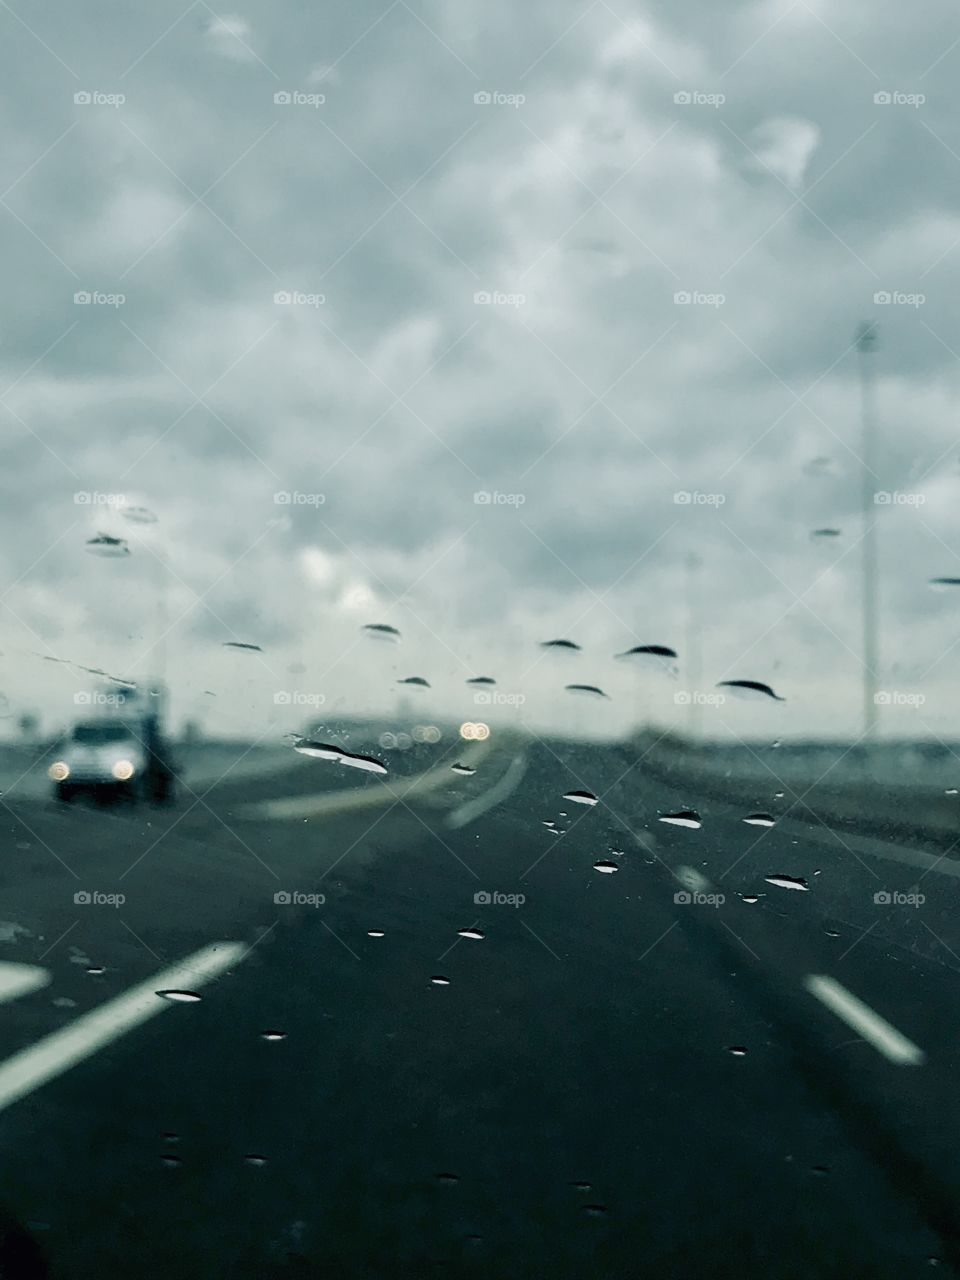 Stormy sky over highway. Roadway not in focus. Raindrops on the windshield are in focus giving an abstract look to the shot. Leaving the jersey shore